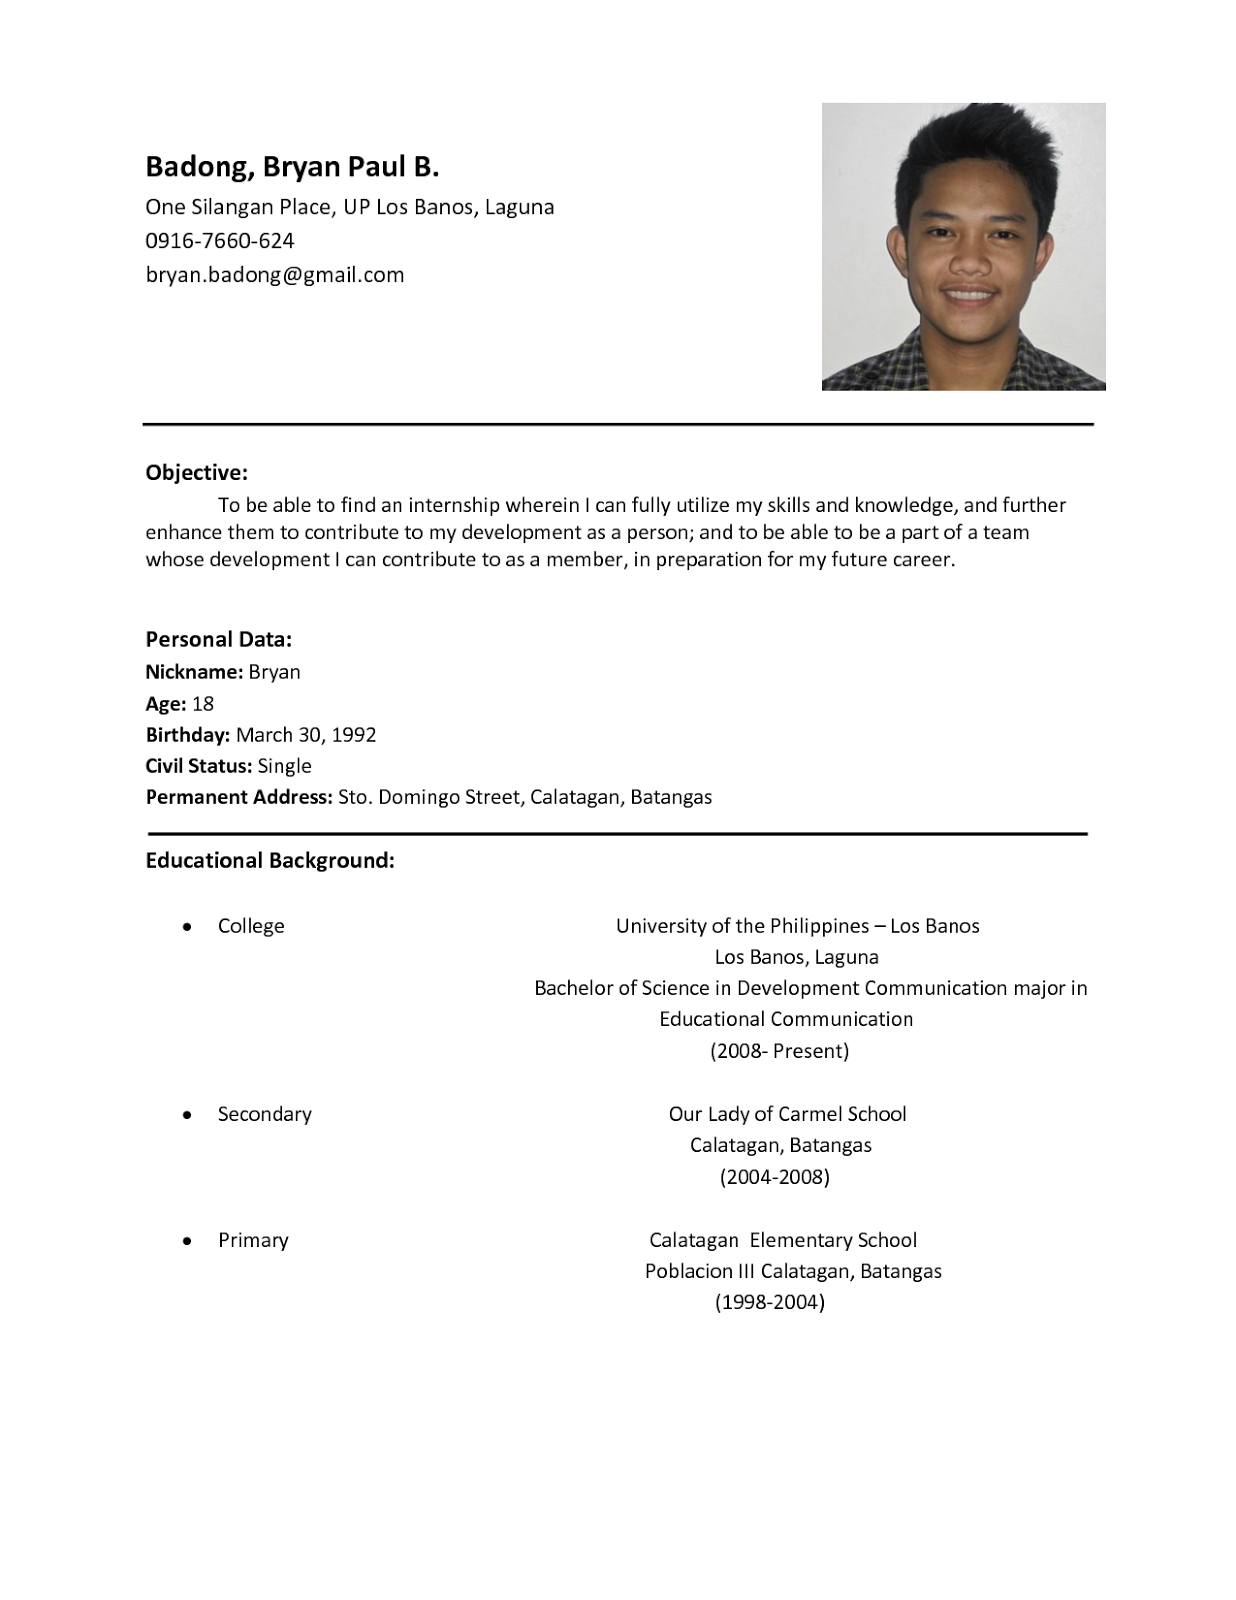 Sample Resume Format for Students | Sample Resumes